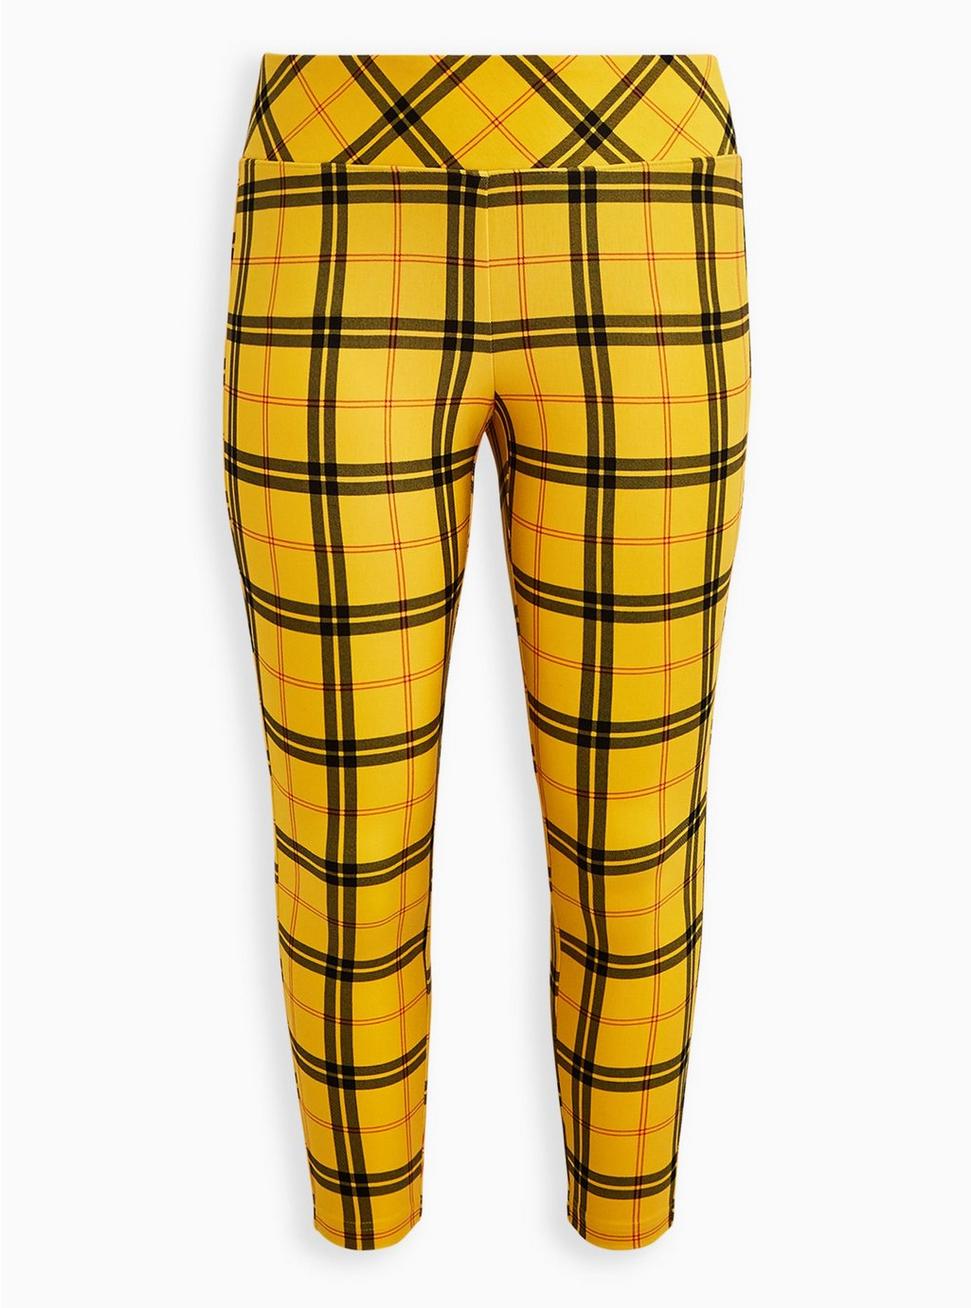 Betsey Johnson Pixie Pant - Luxe Ponte Plaid Yellow, OTHER PRINTS, hi-res